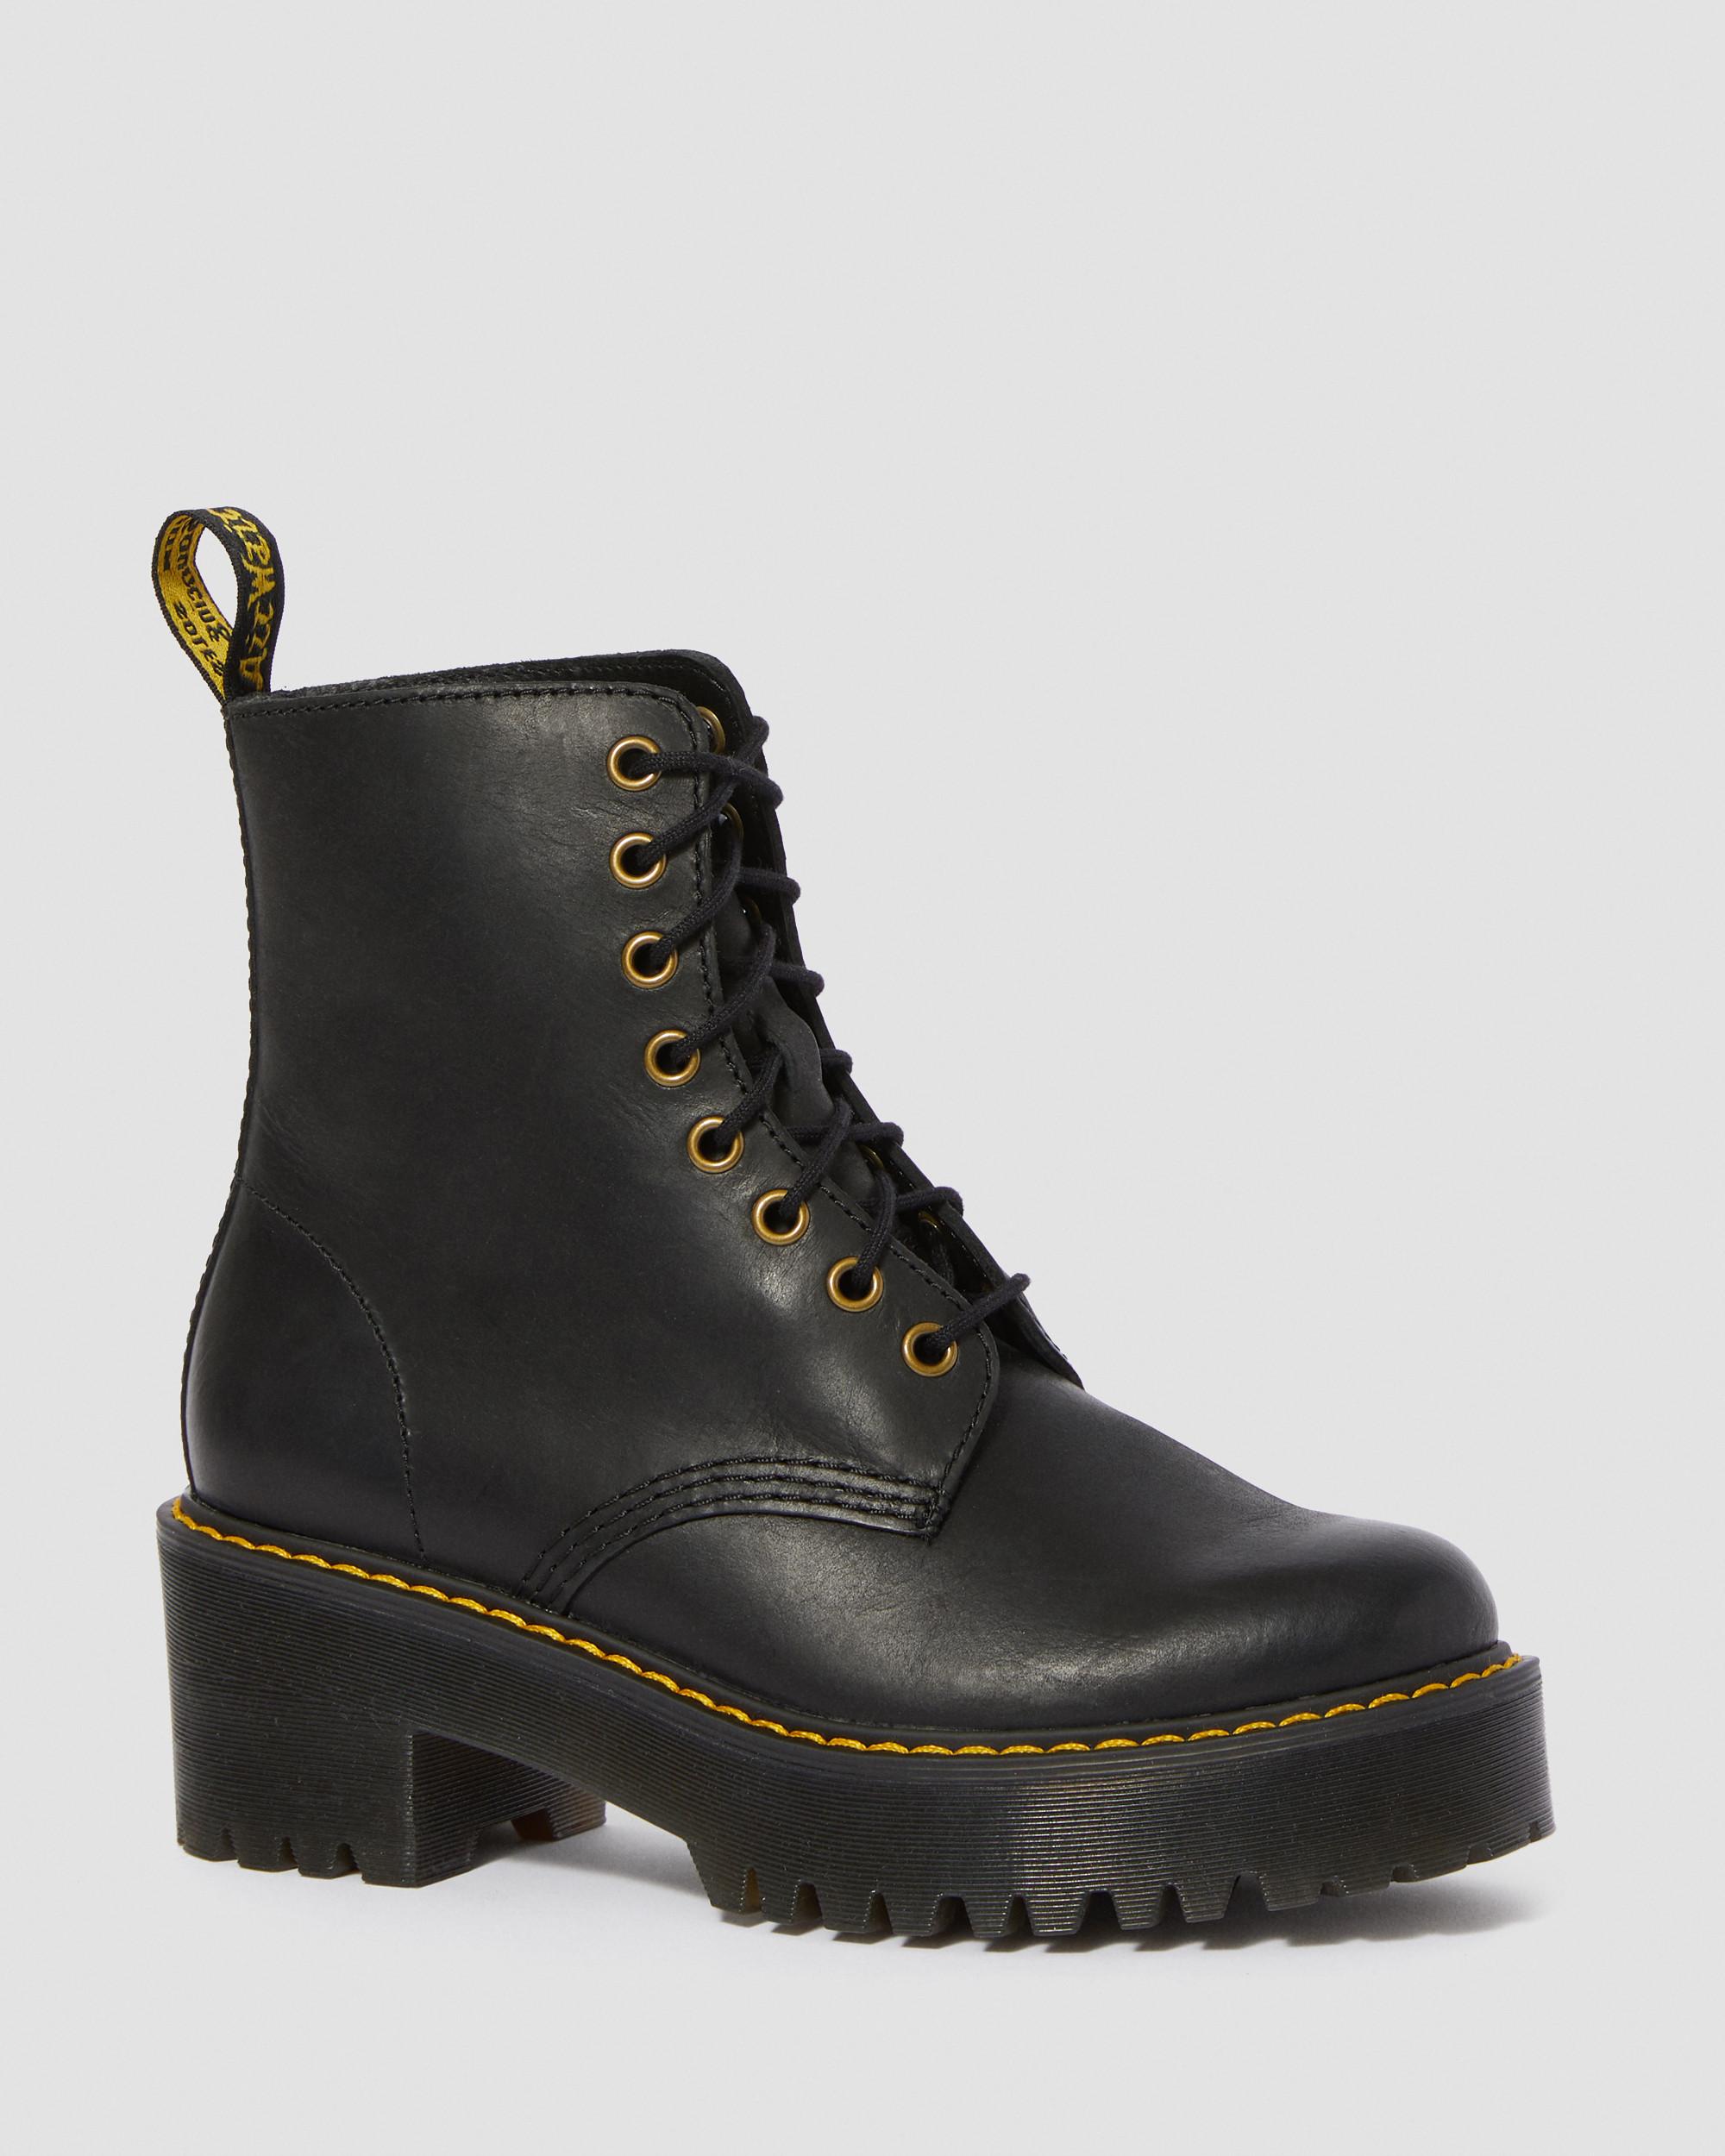 SHRIVER HI LEATHER LACE UP BOOTS | Dr 